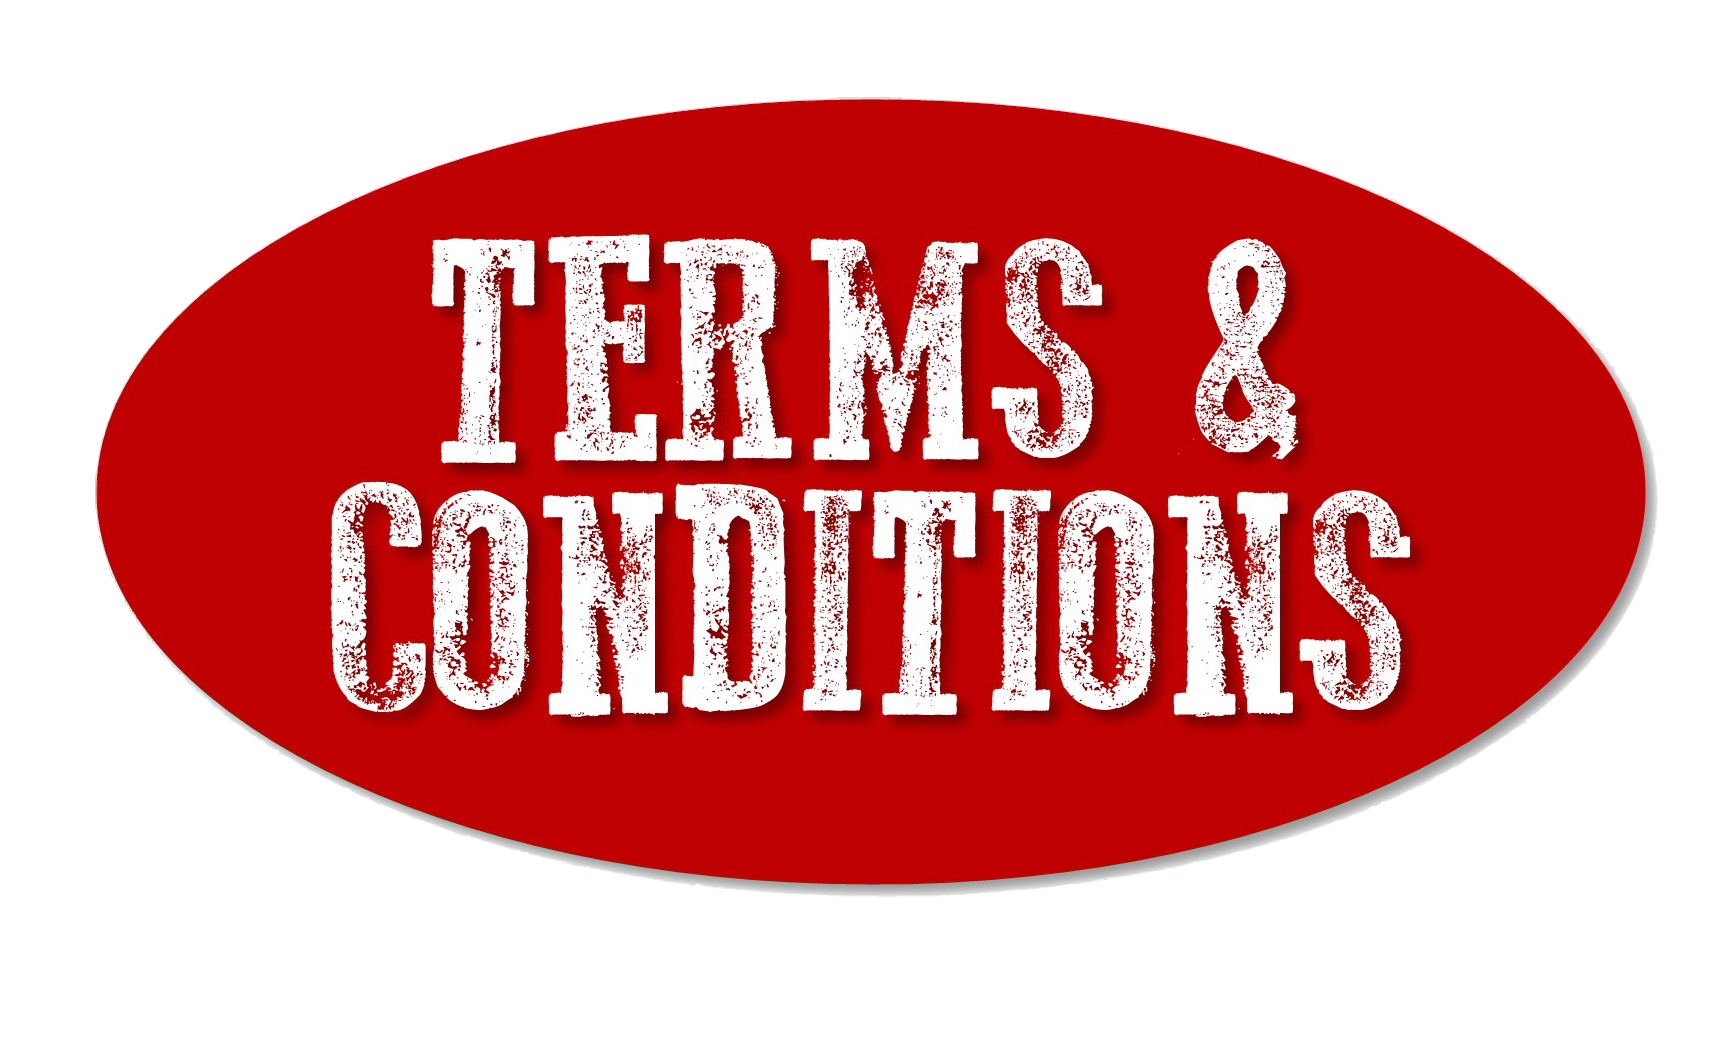 GamerPe | Terms & Conditions